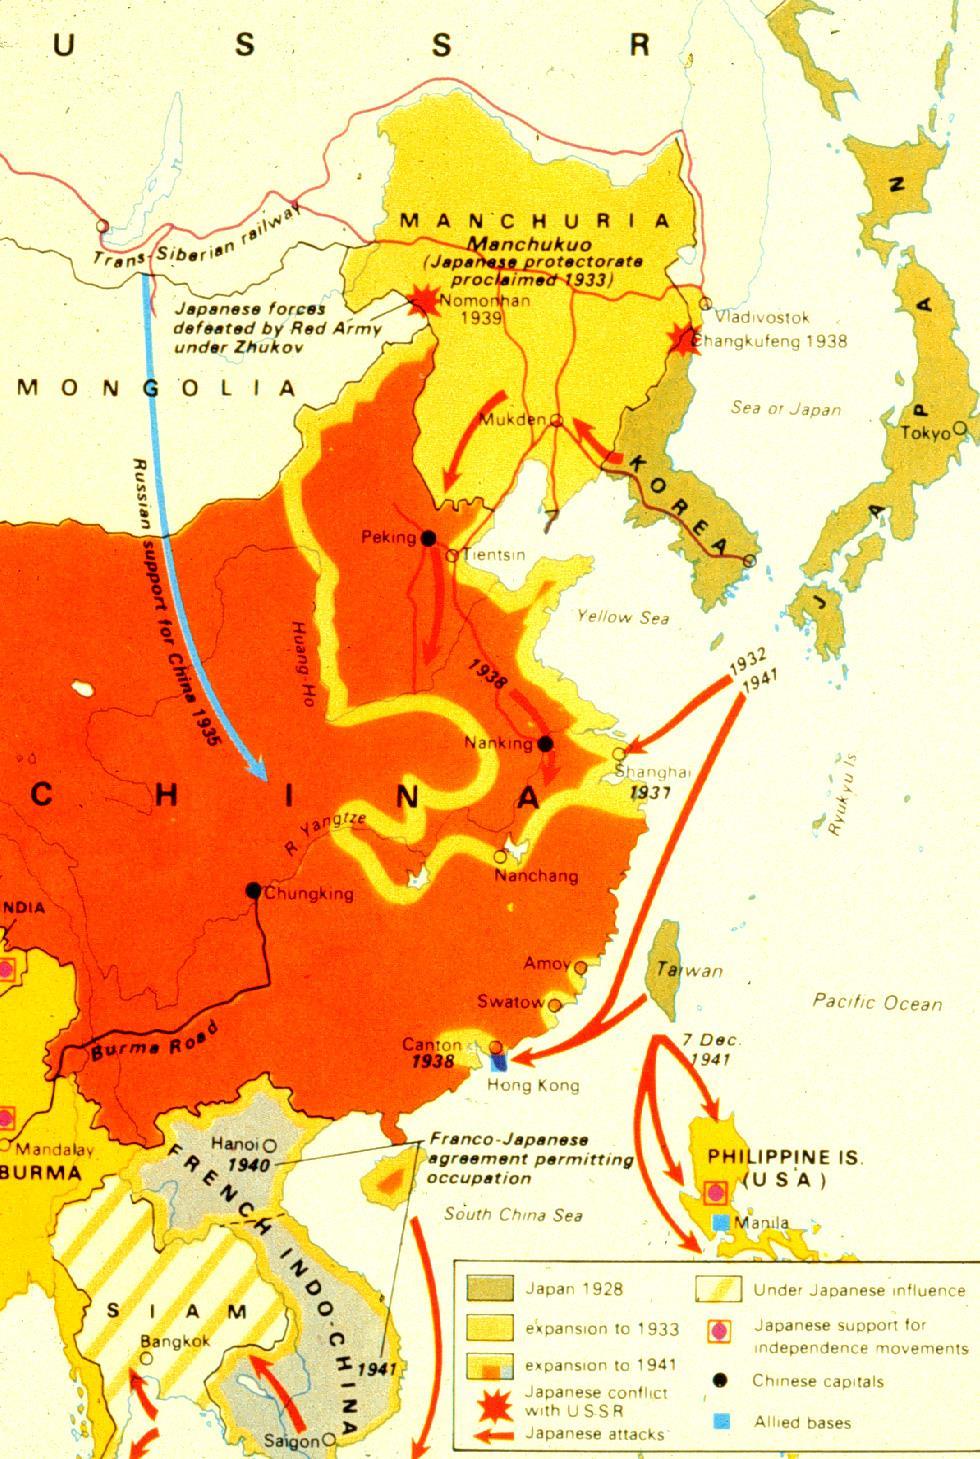 Japanese Expansion Sought total control of Pacific (resources) 1931- military